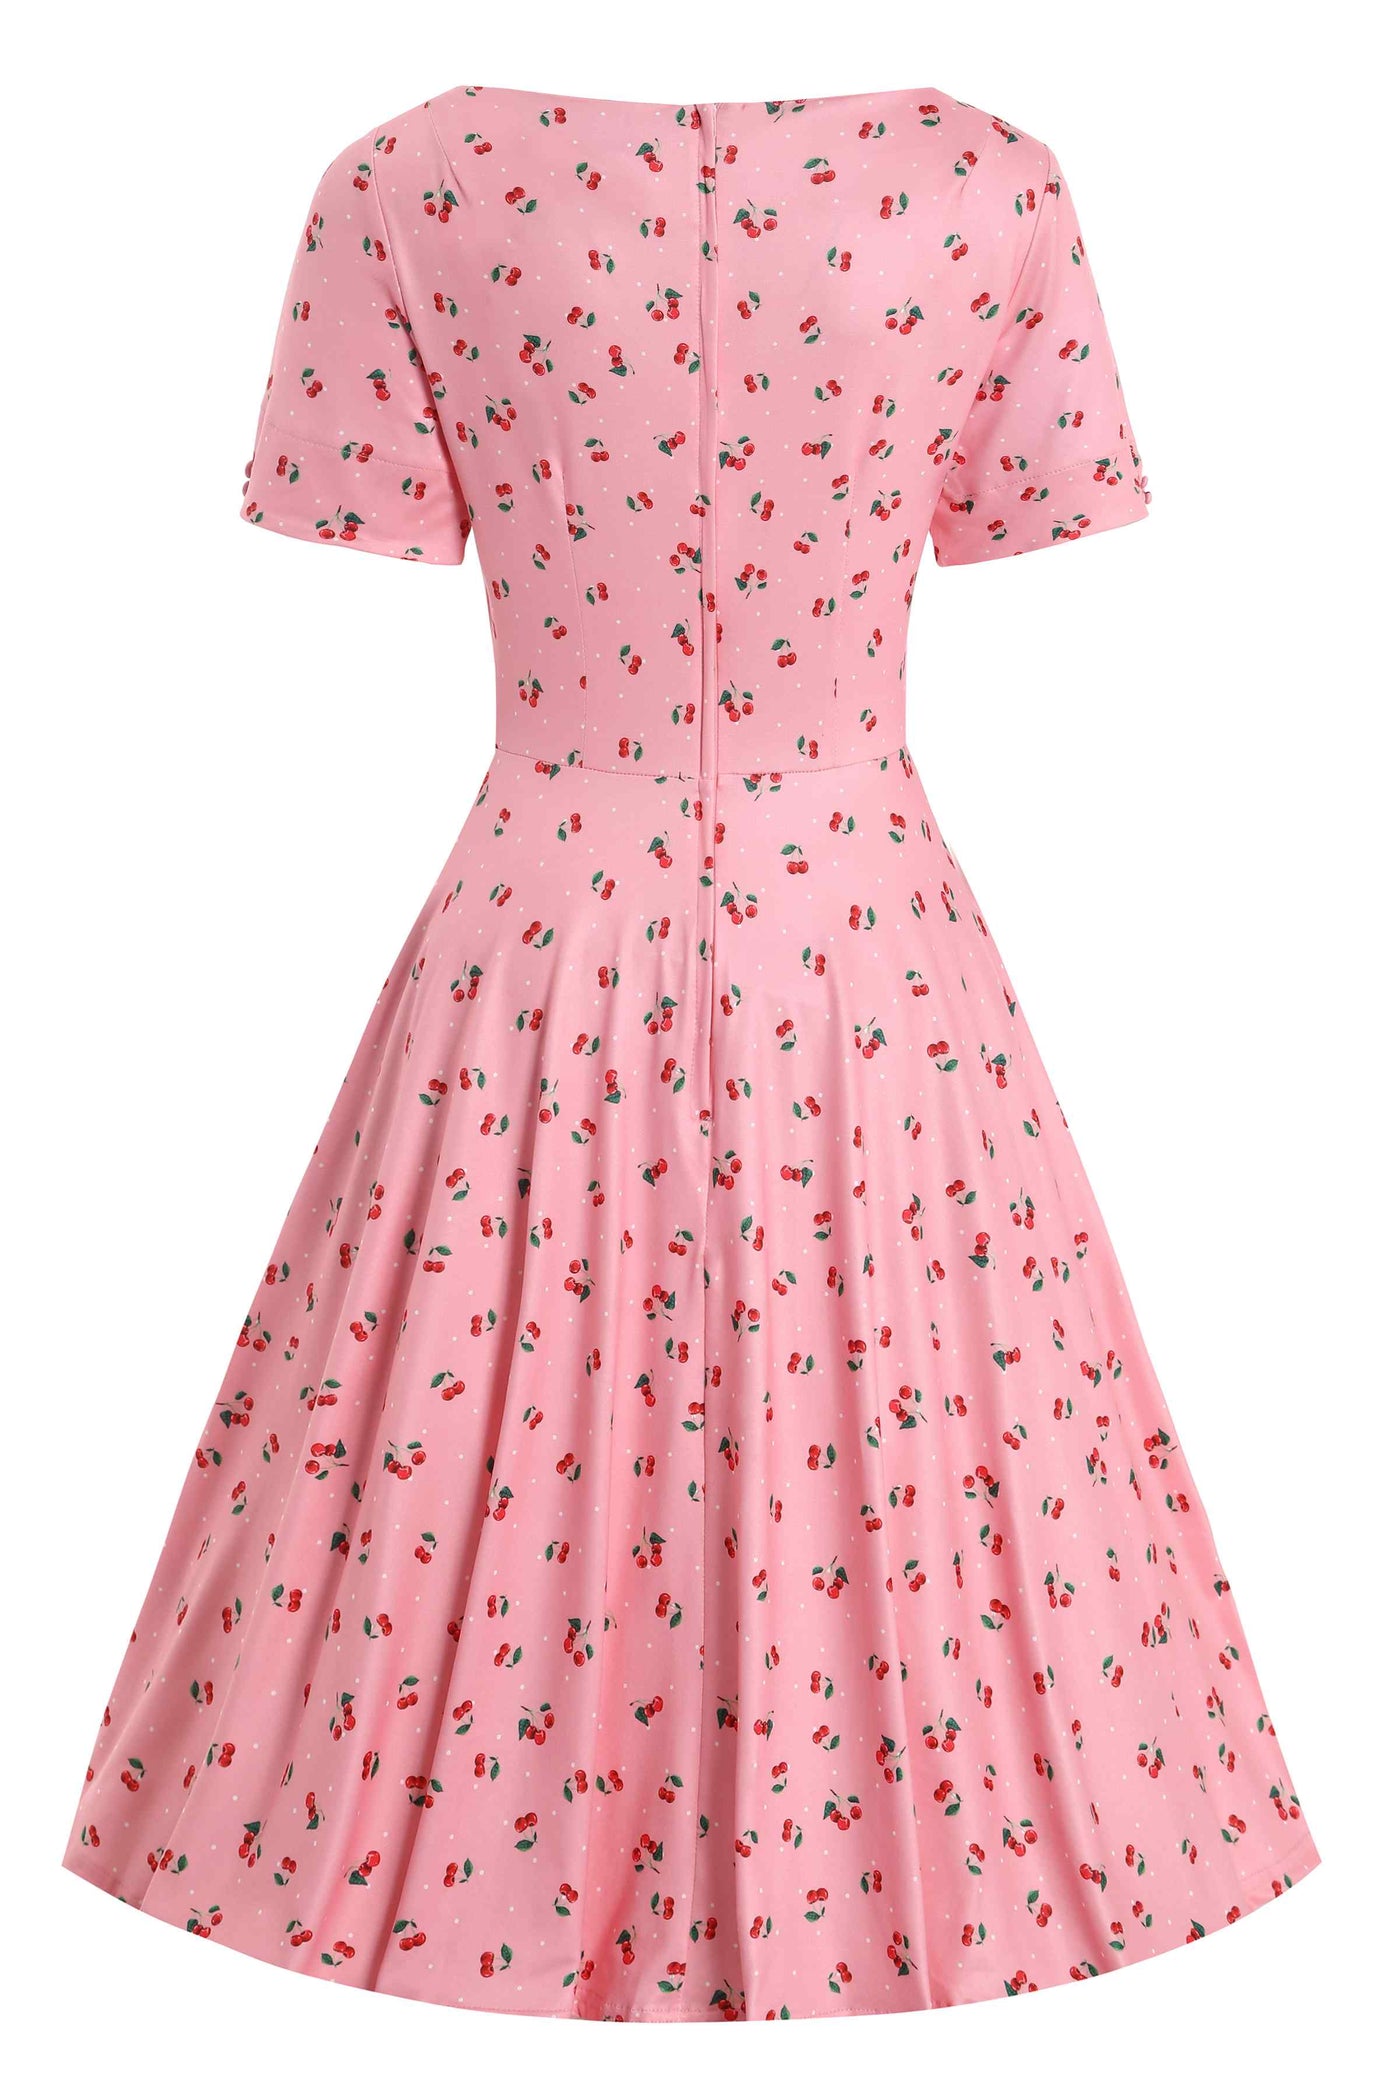 Back view of Cherry Print 50s Style Dress in Pink